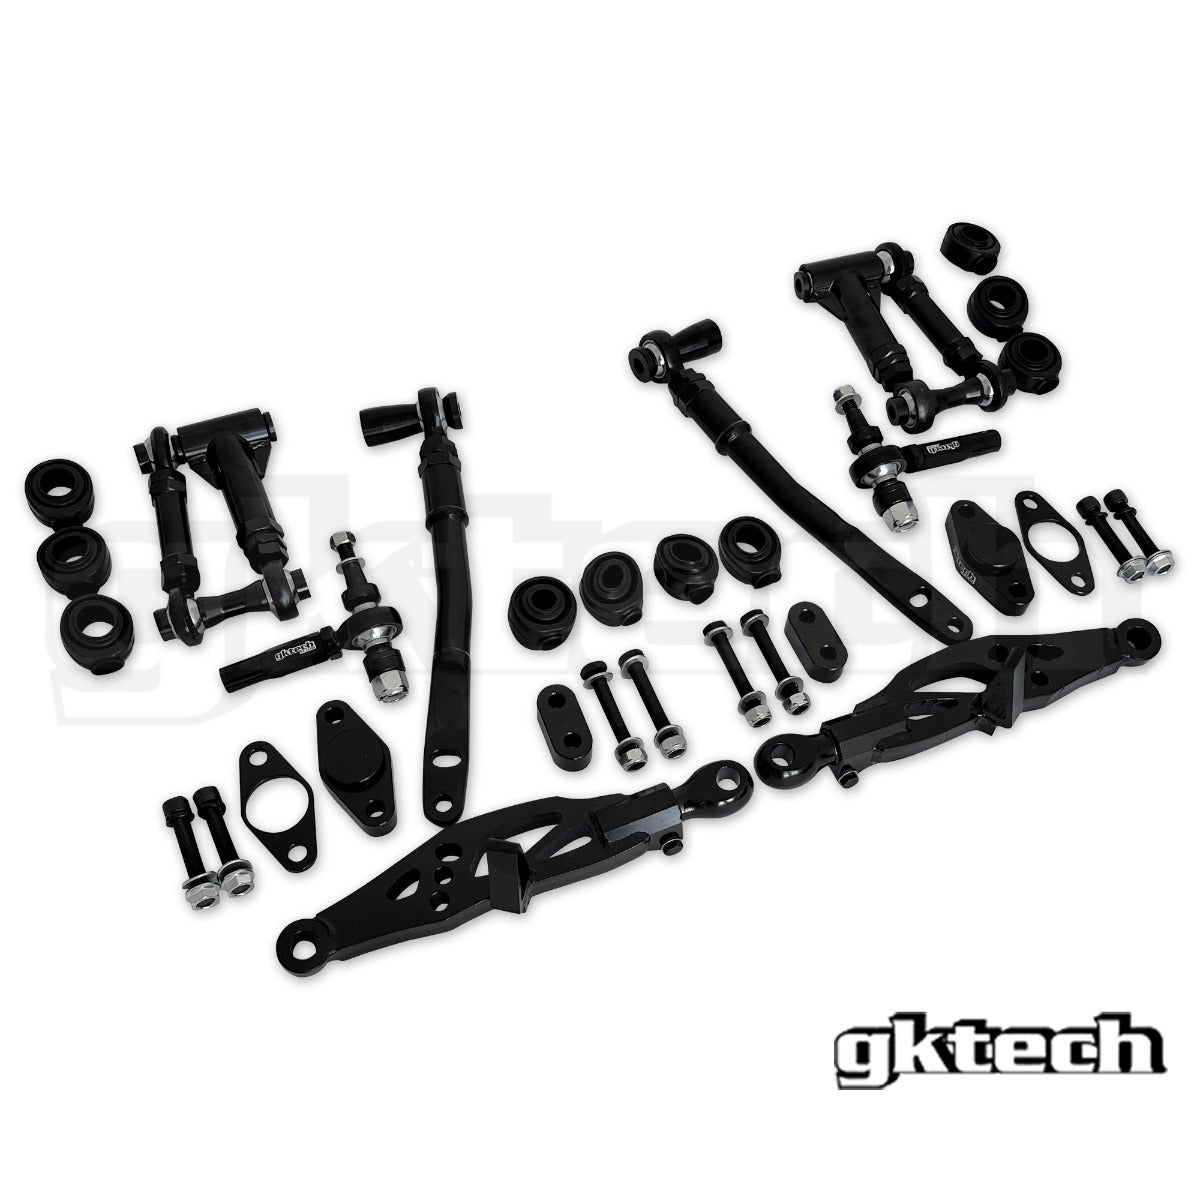 R32 GT-R / GTS4 Front Suspension arm package (10% combo discount)